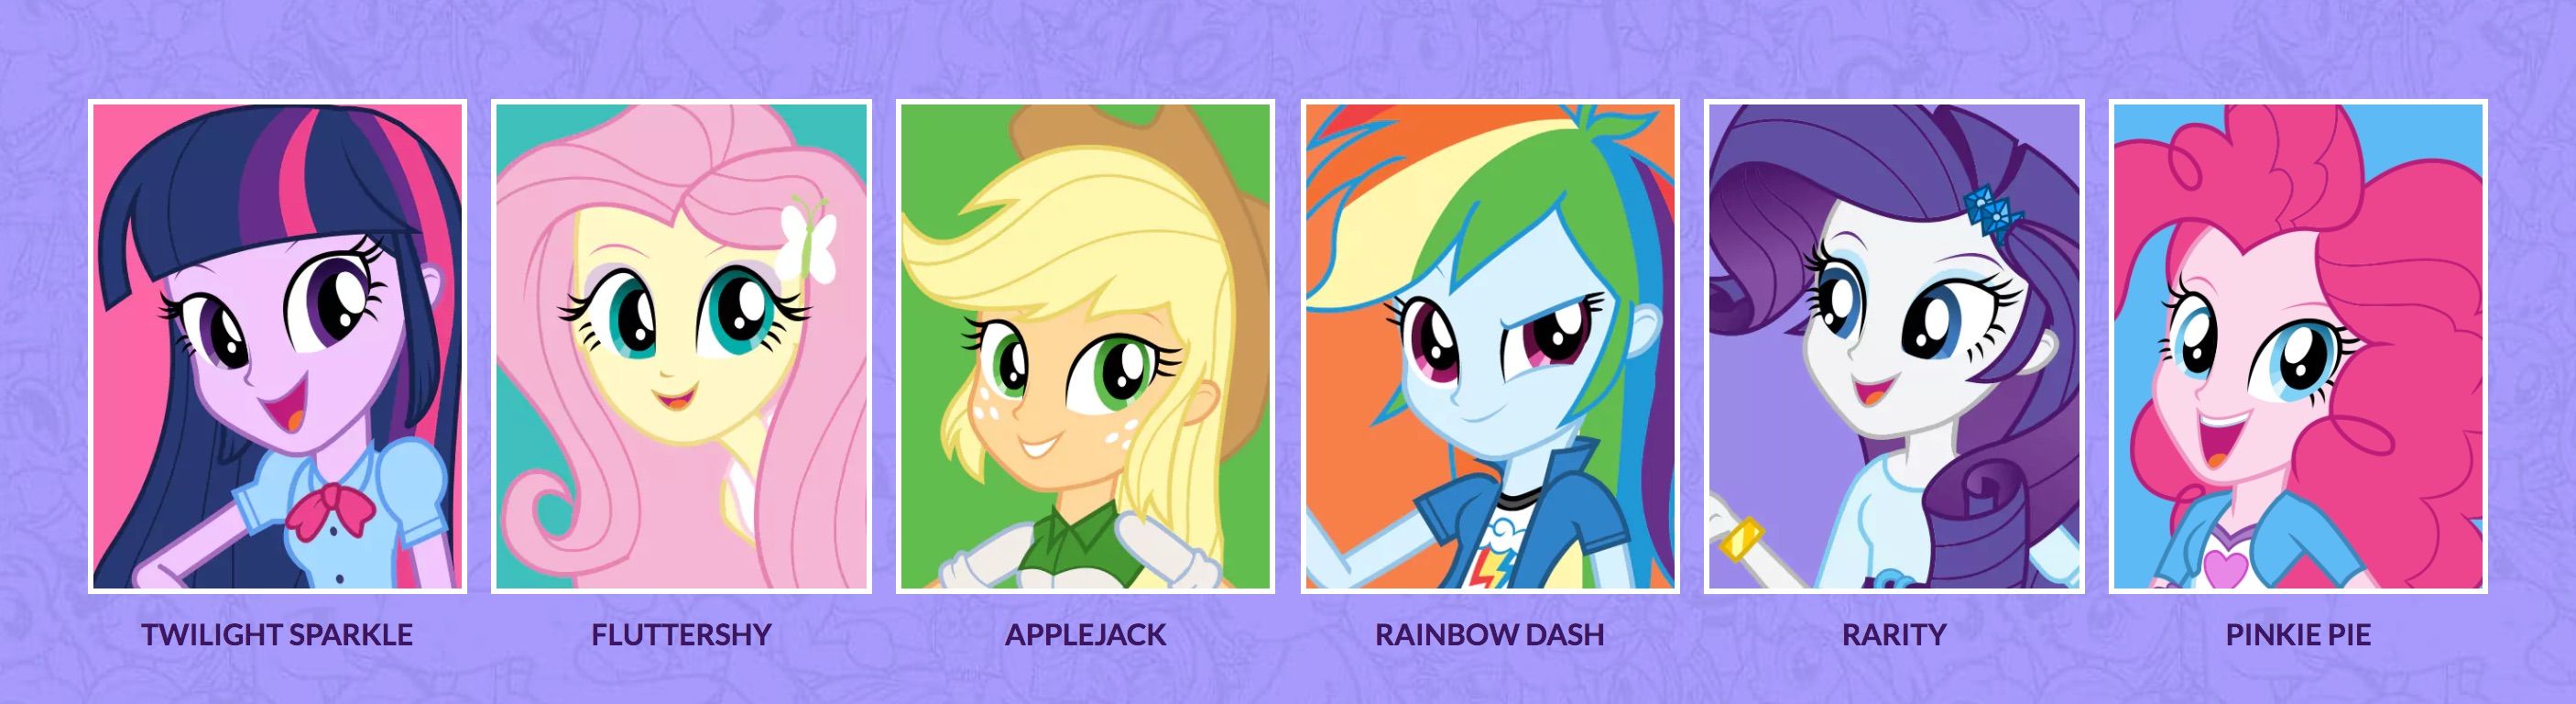 Equestria Girls Names of The Mane 6. My Little Pony: Equestria